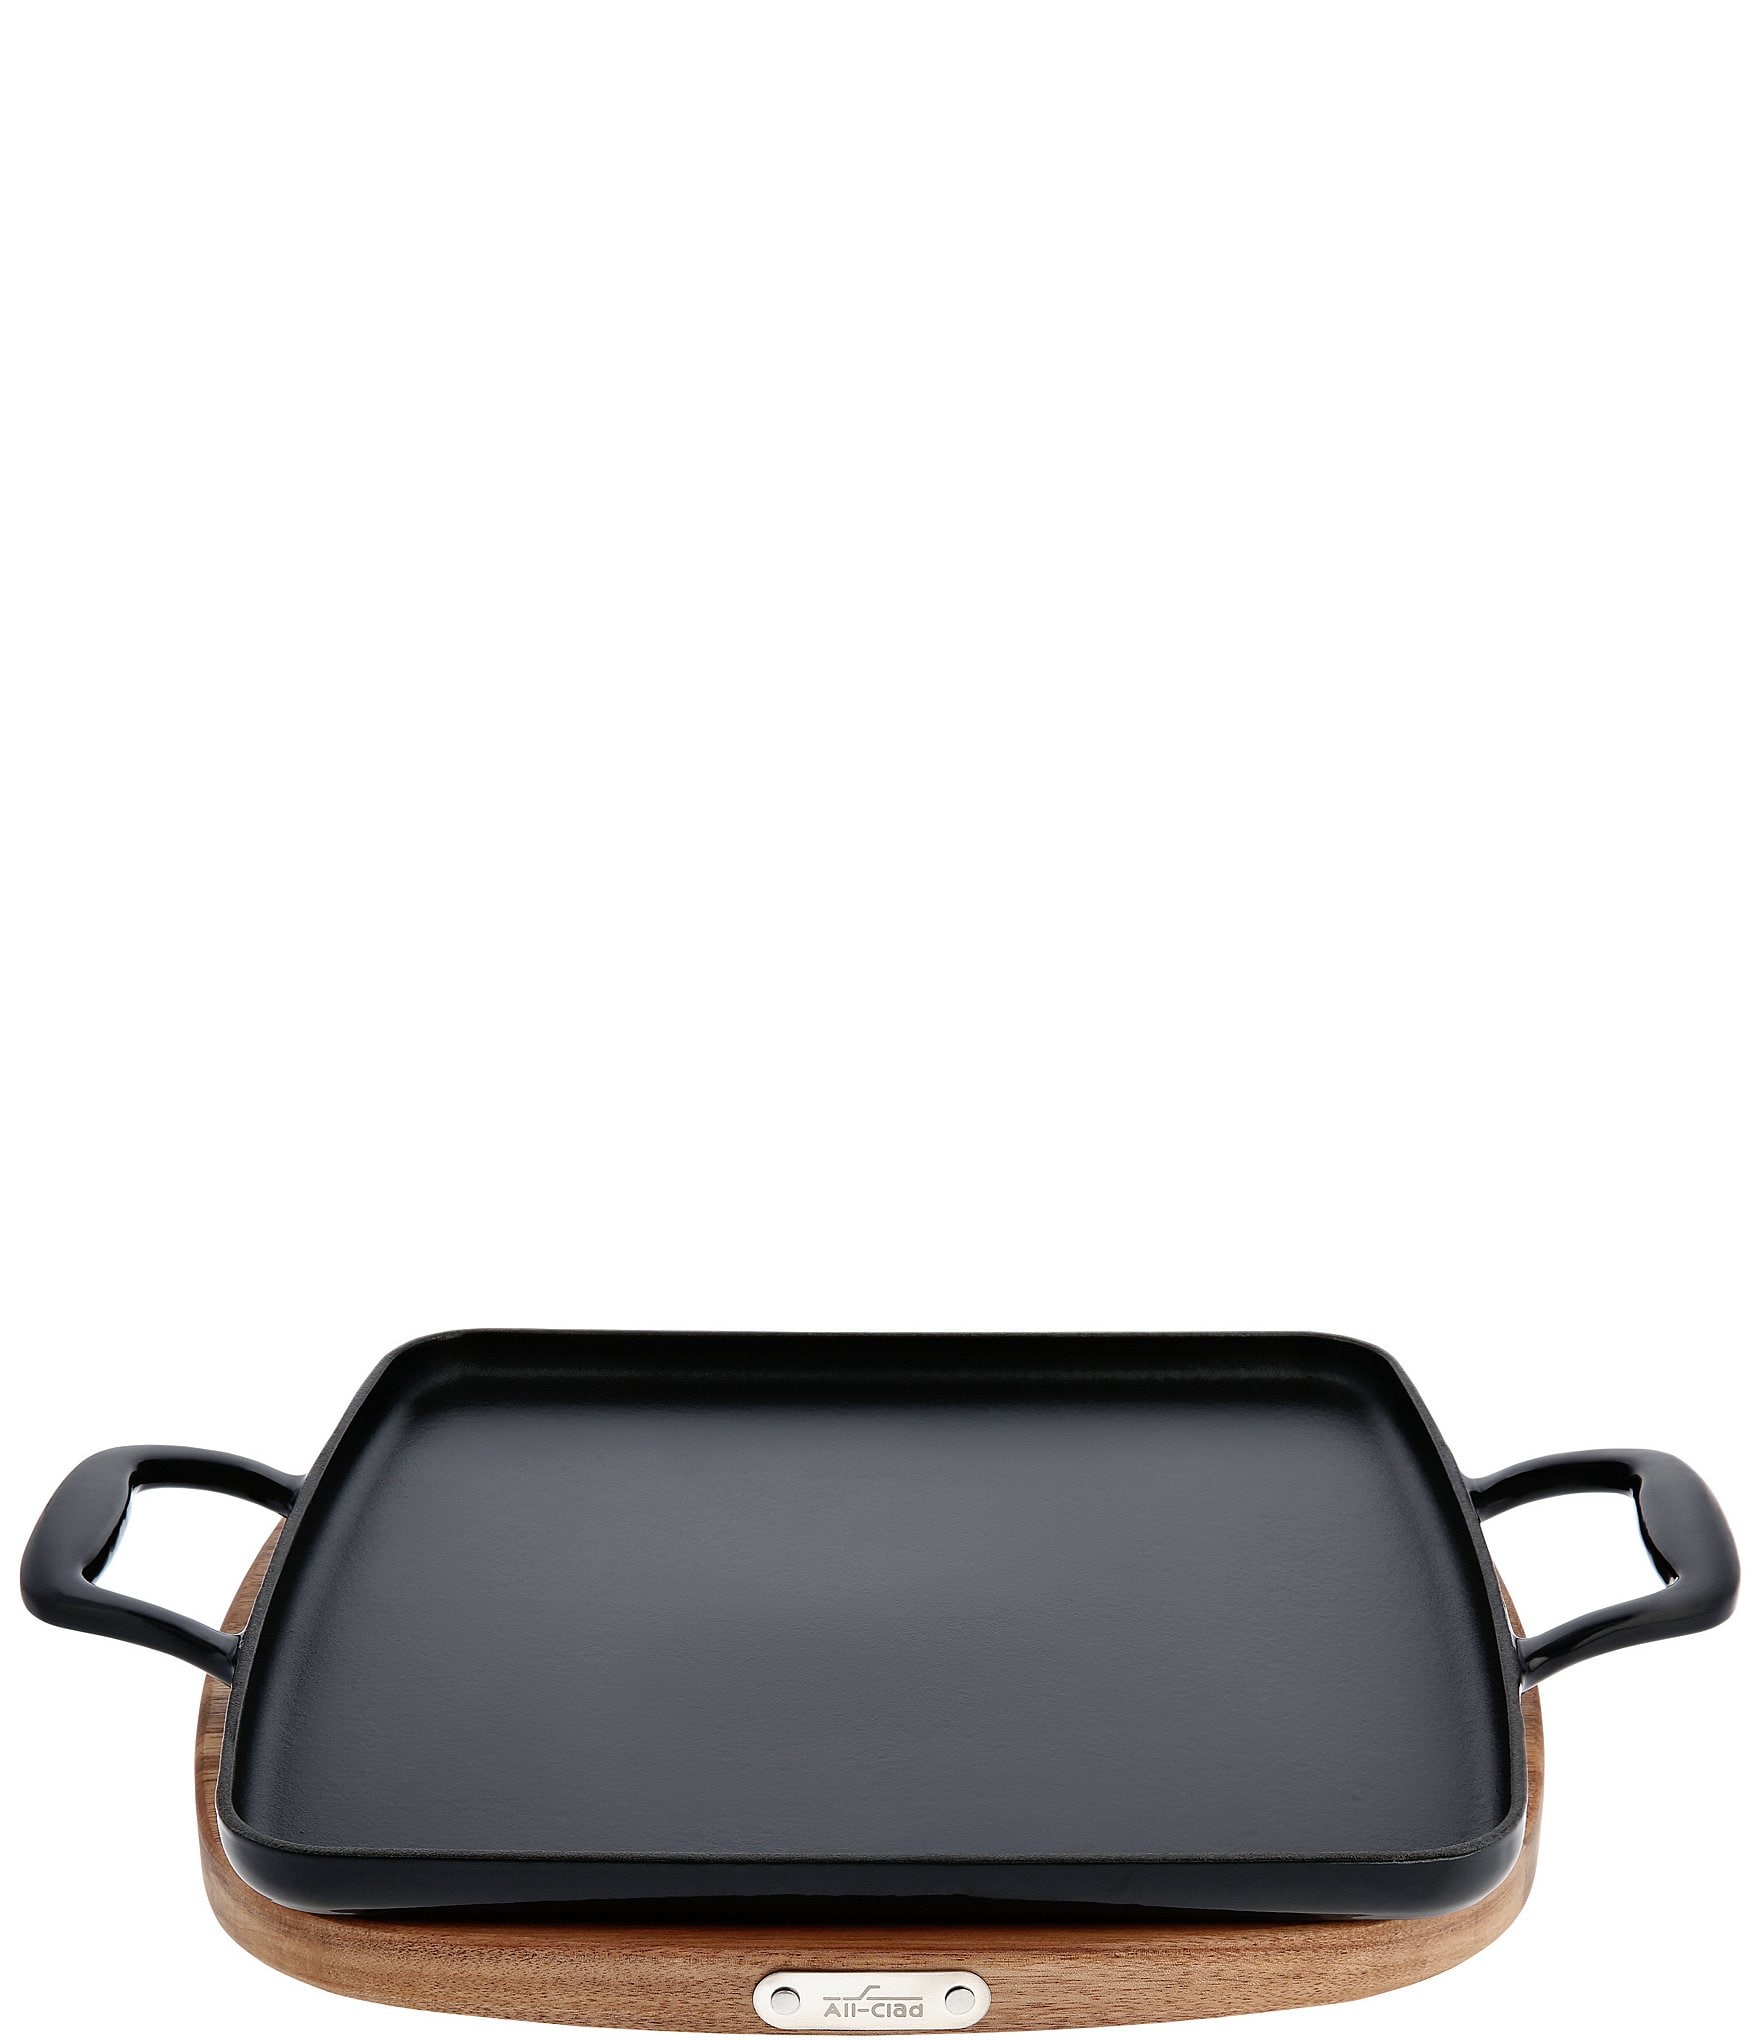 https://dimg.dillards.com/is/image/DillardsZoom/zoom/all-clad-enameled-cast-iron-griddle-with-acacia-wood-trivet-11-inch/00000000_zi_20417884.jpg